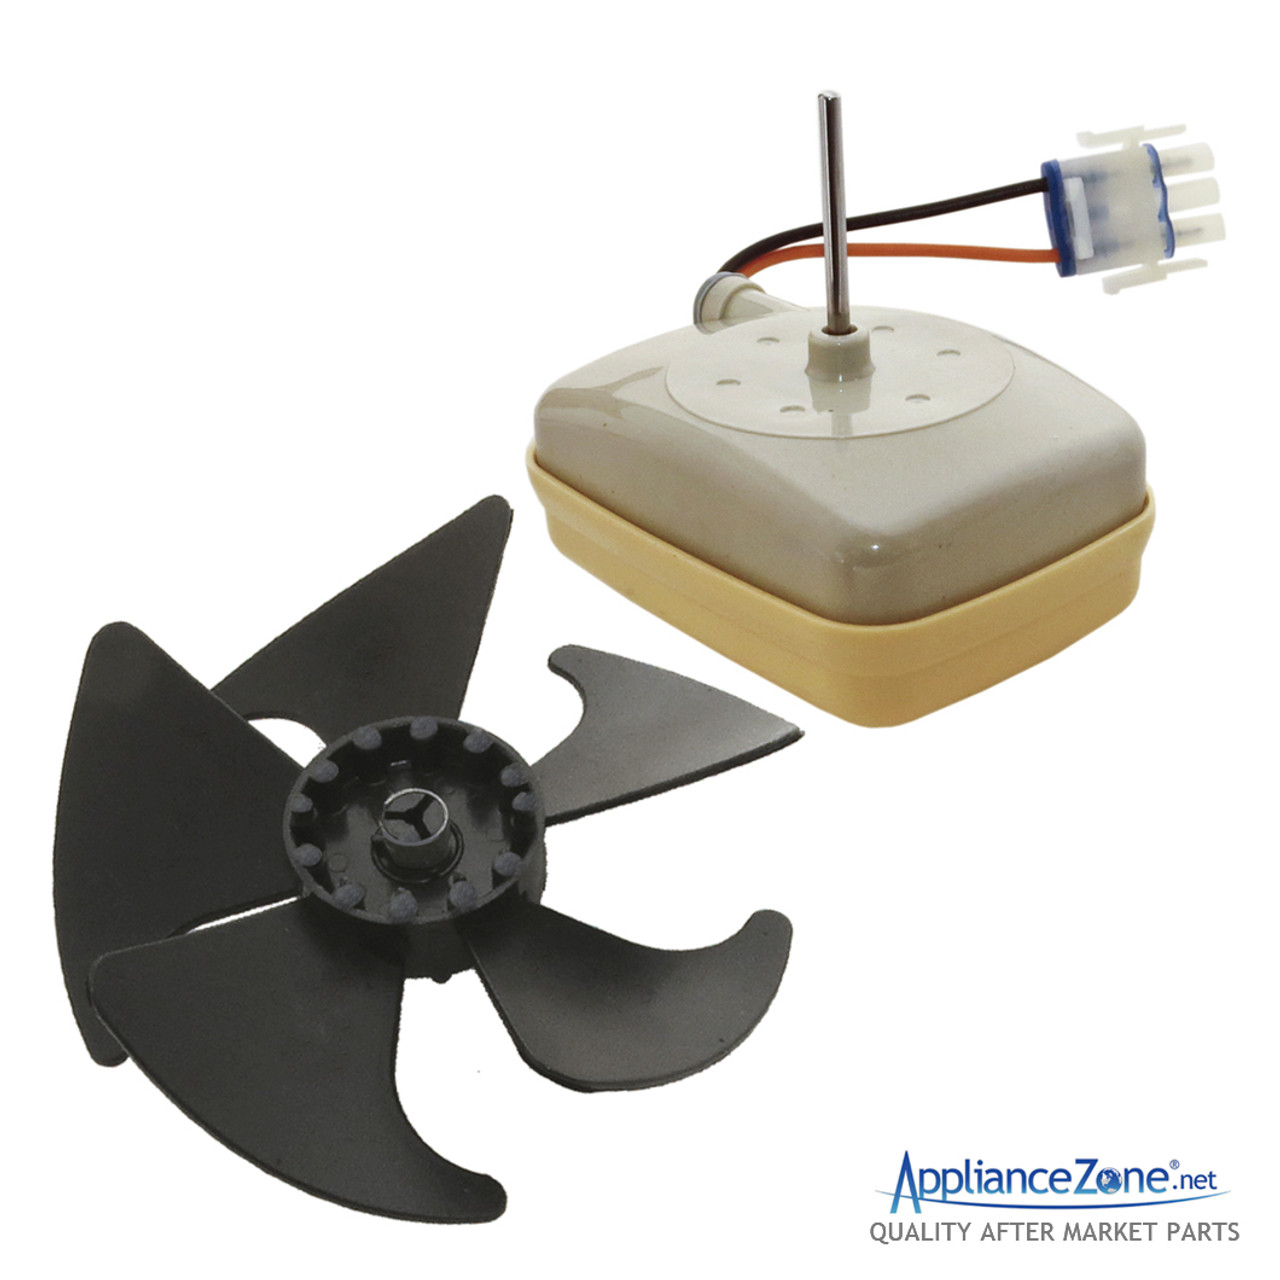 Replacement Wr60x10141 Wr60x10204 Refrigerator Fan Motor Blade For Ge Appliance Zone